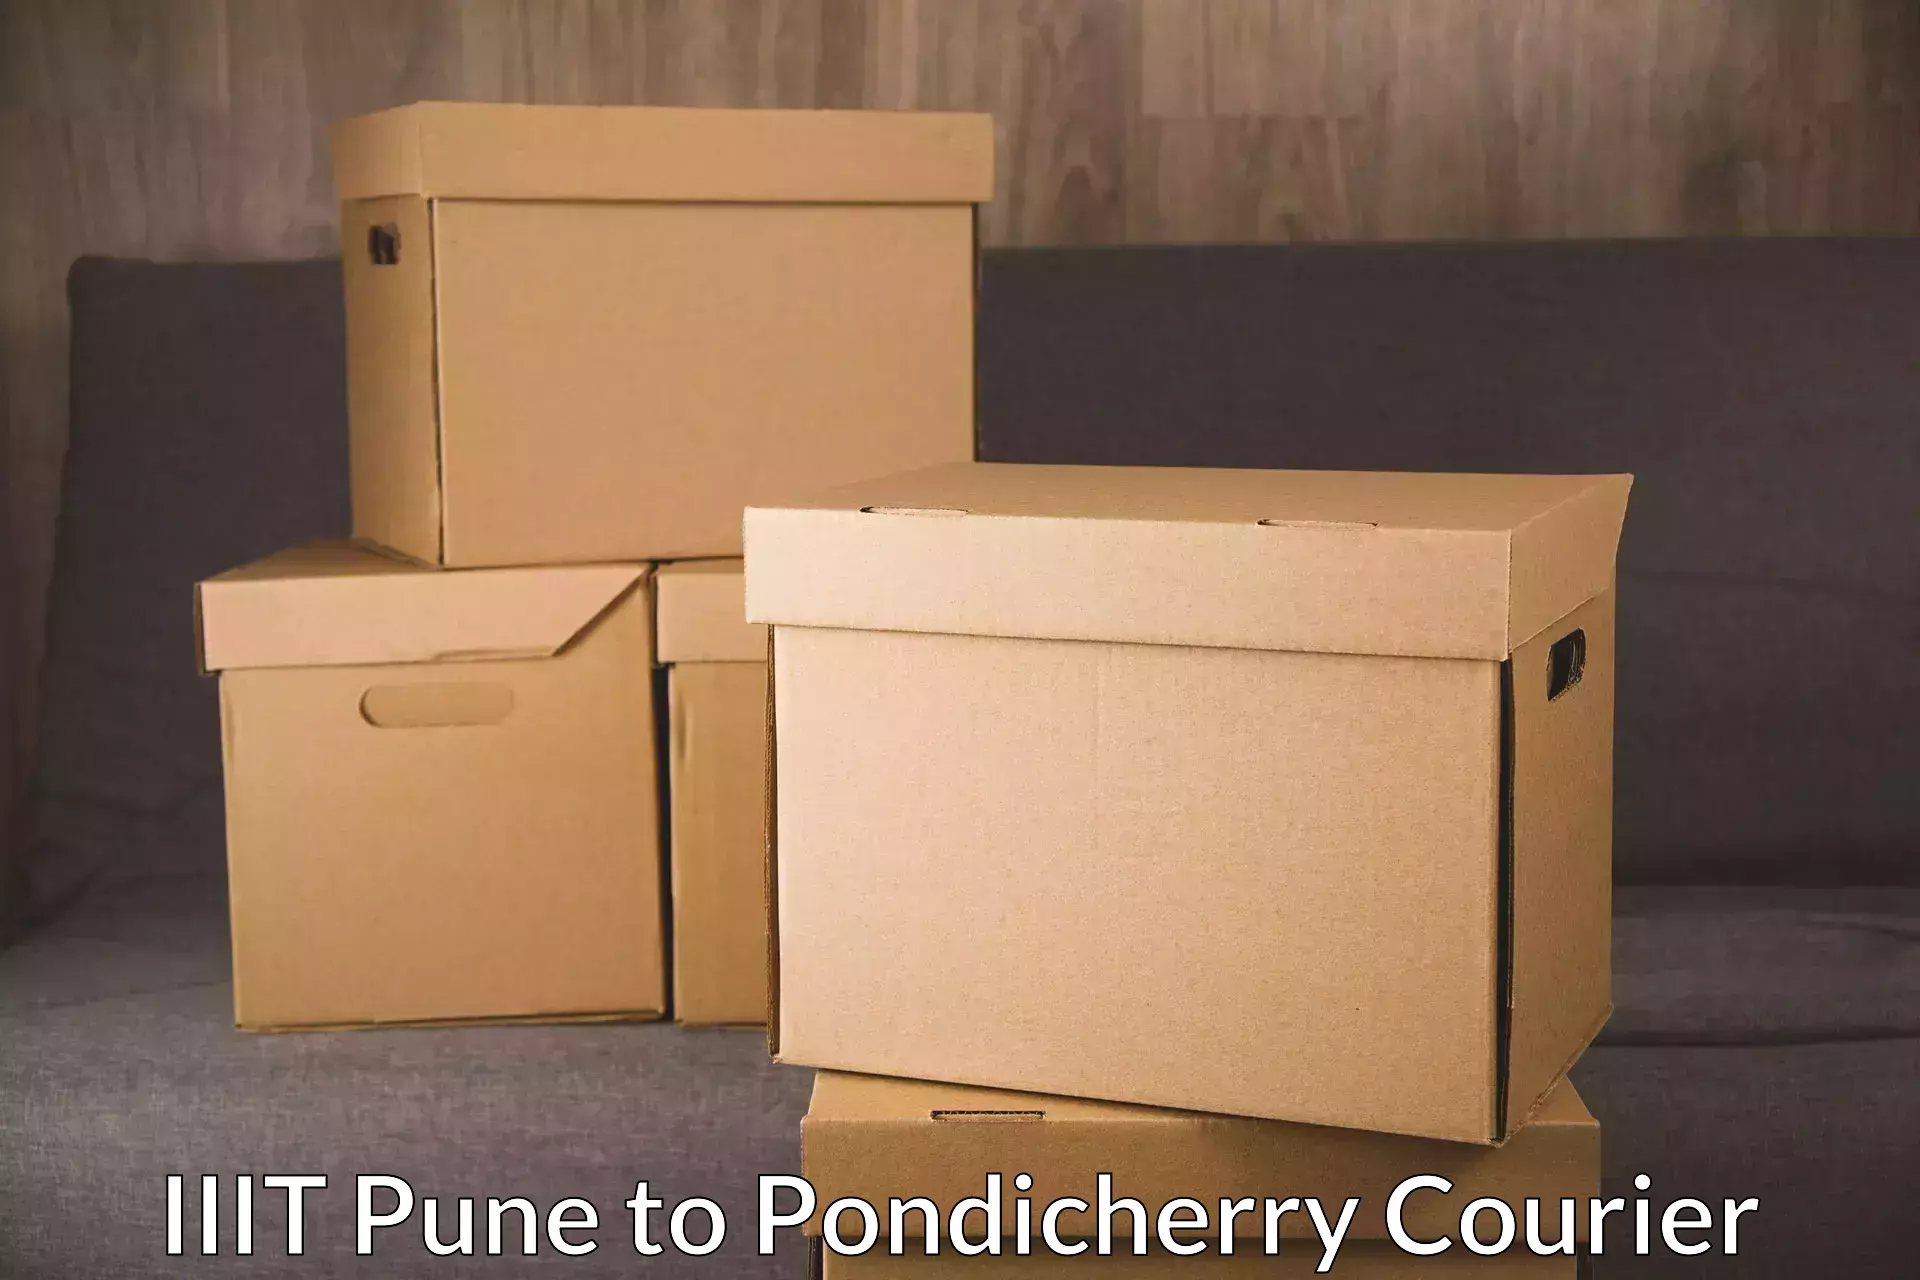 Global parcel delivery IIIT Pune to Pondicherry